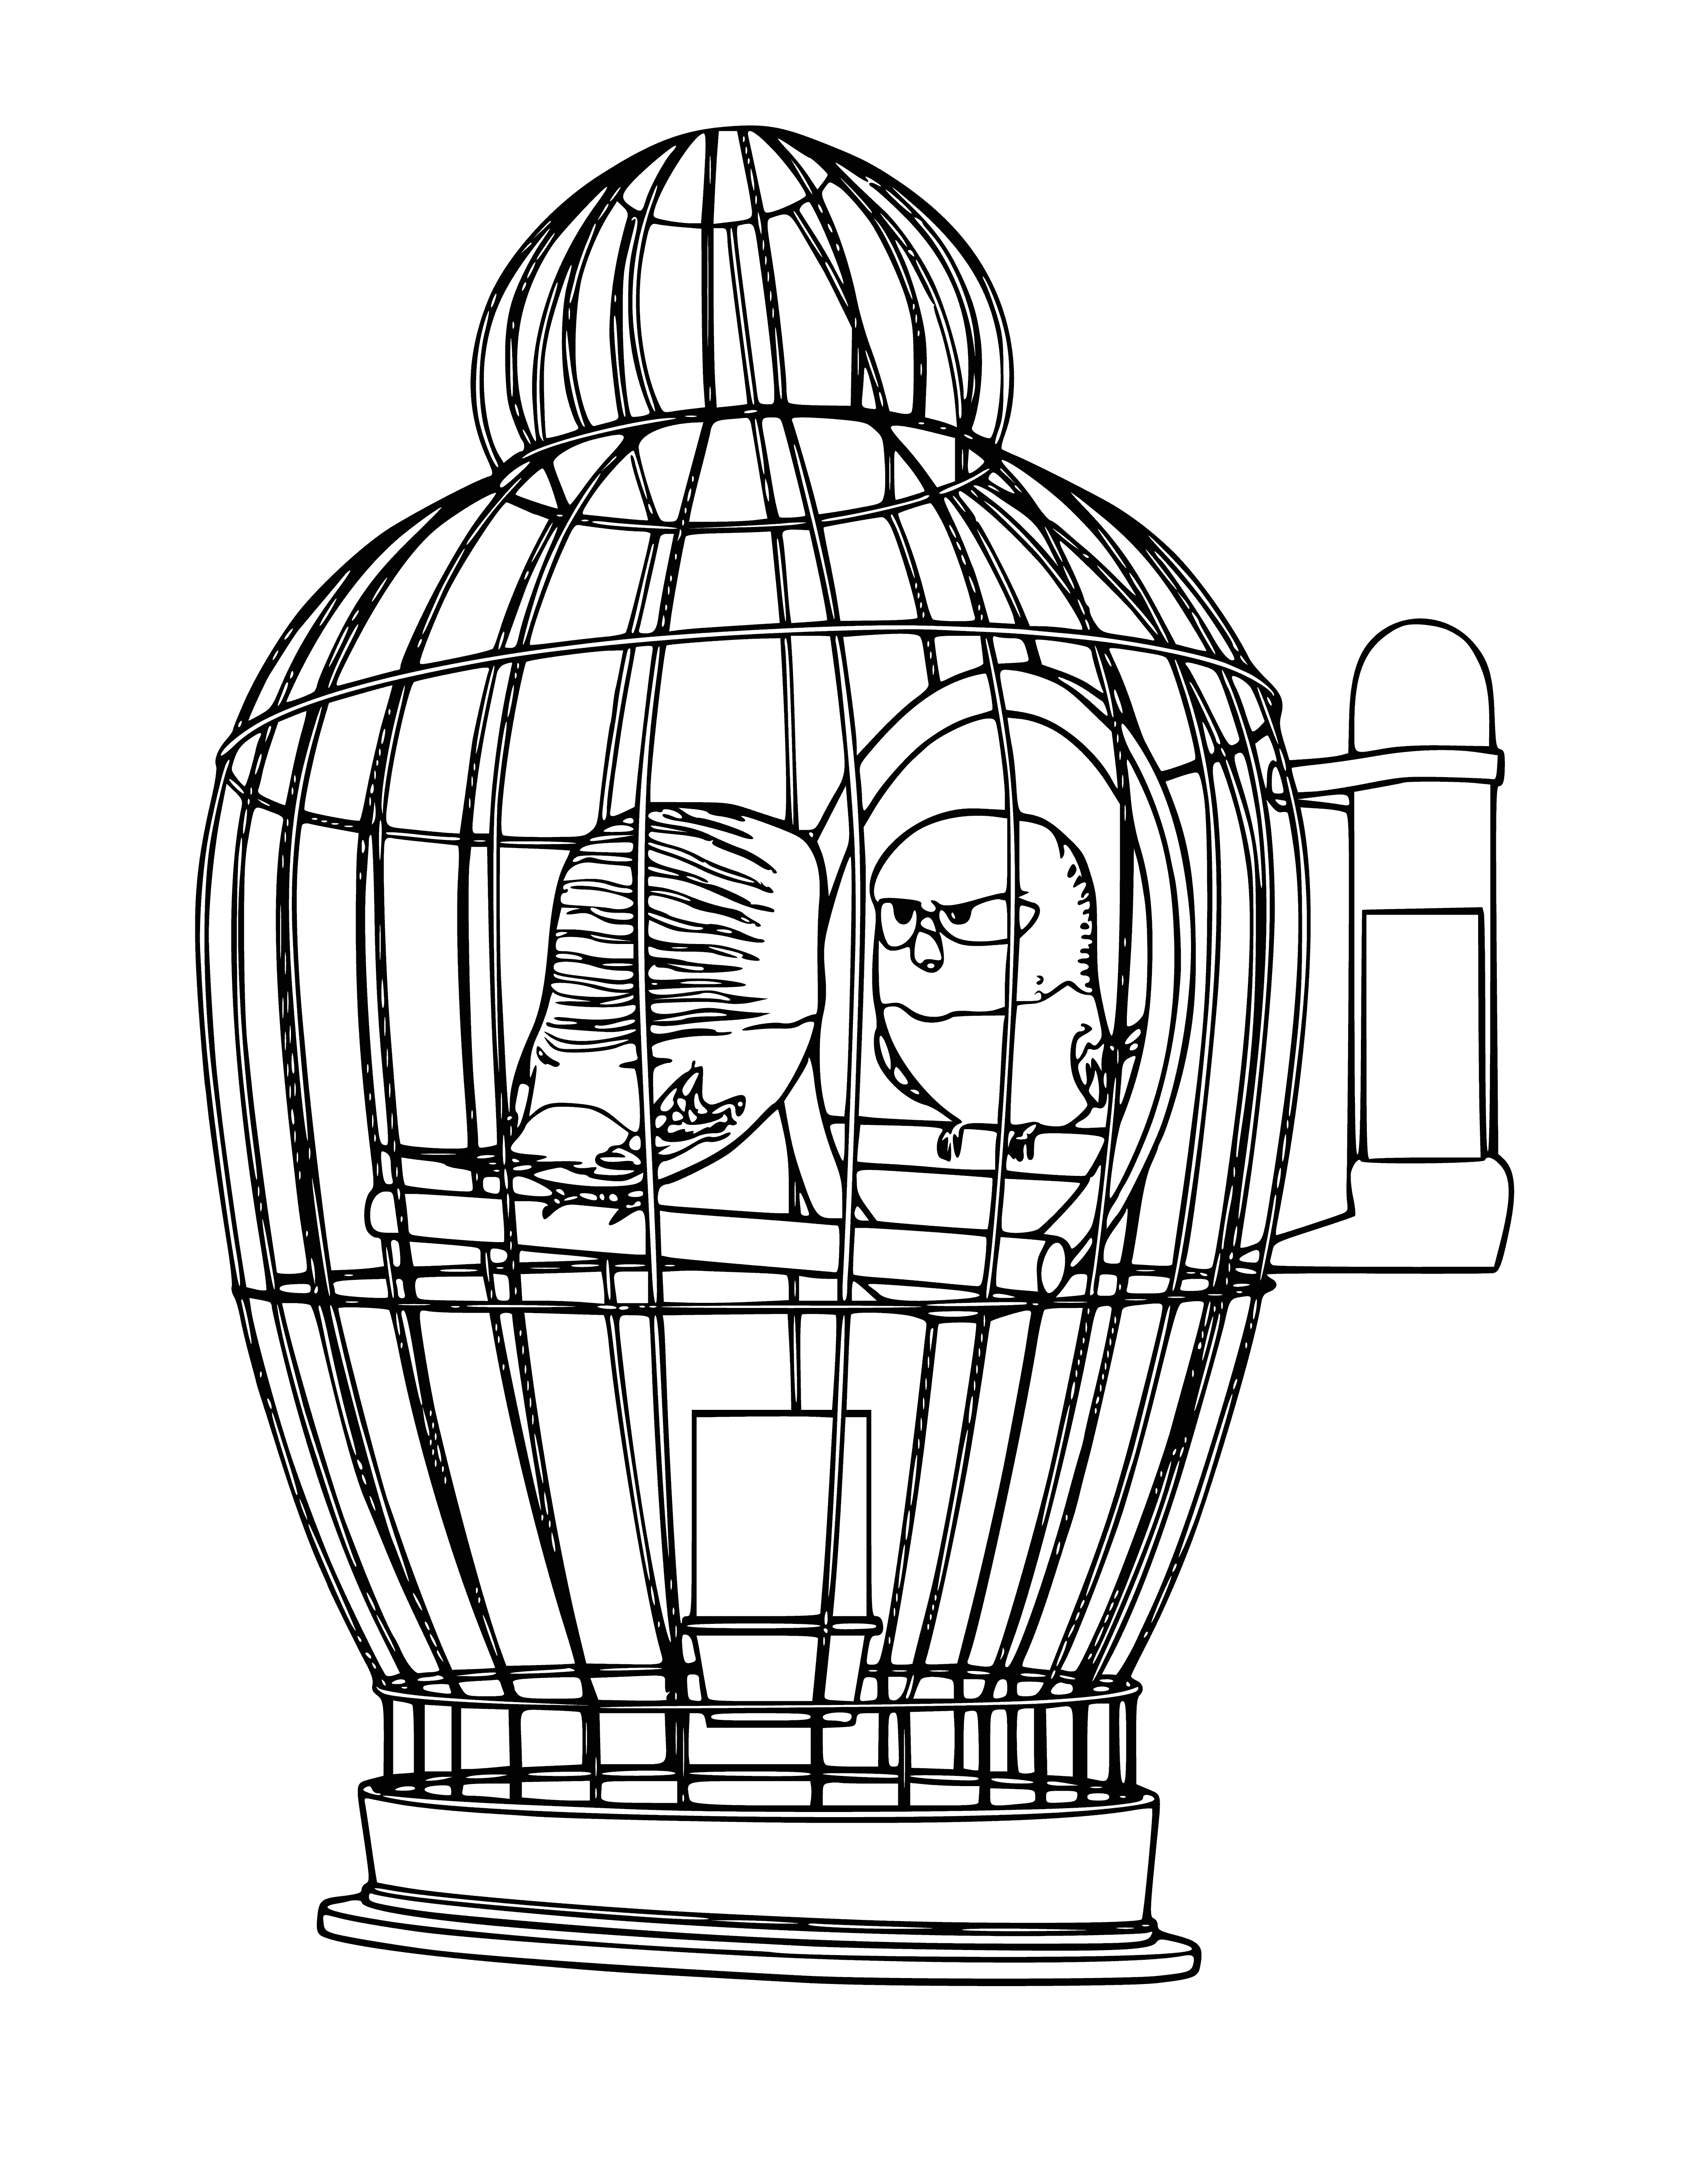 Parrot in a cage coloring page